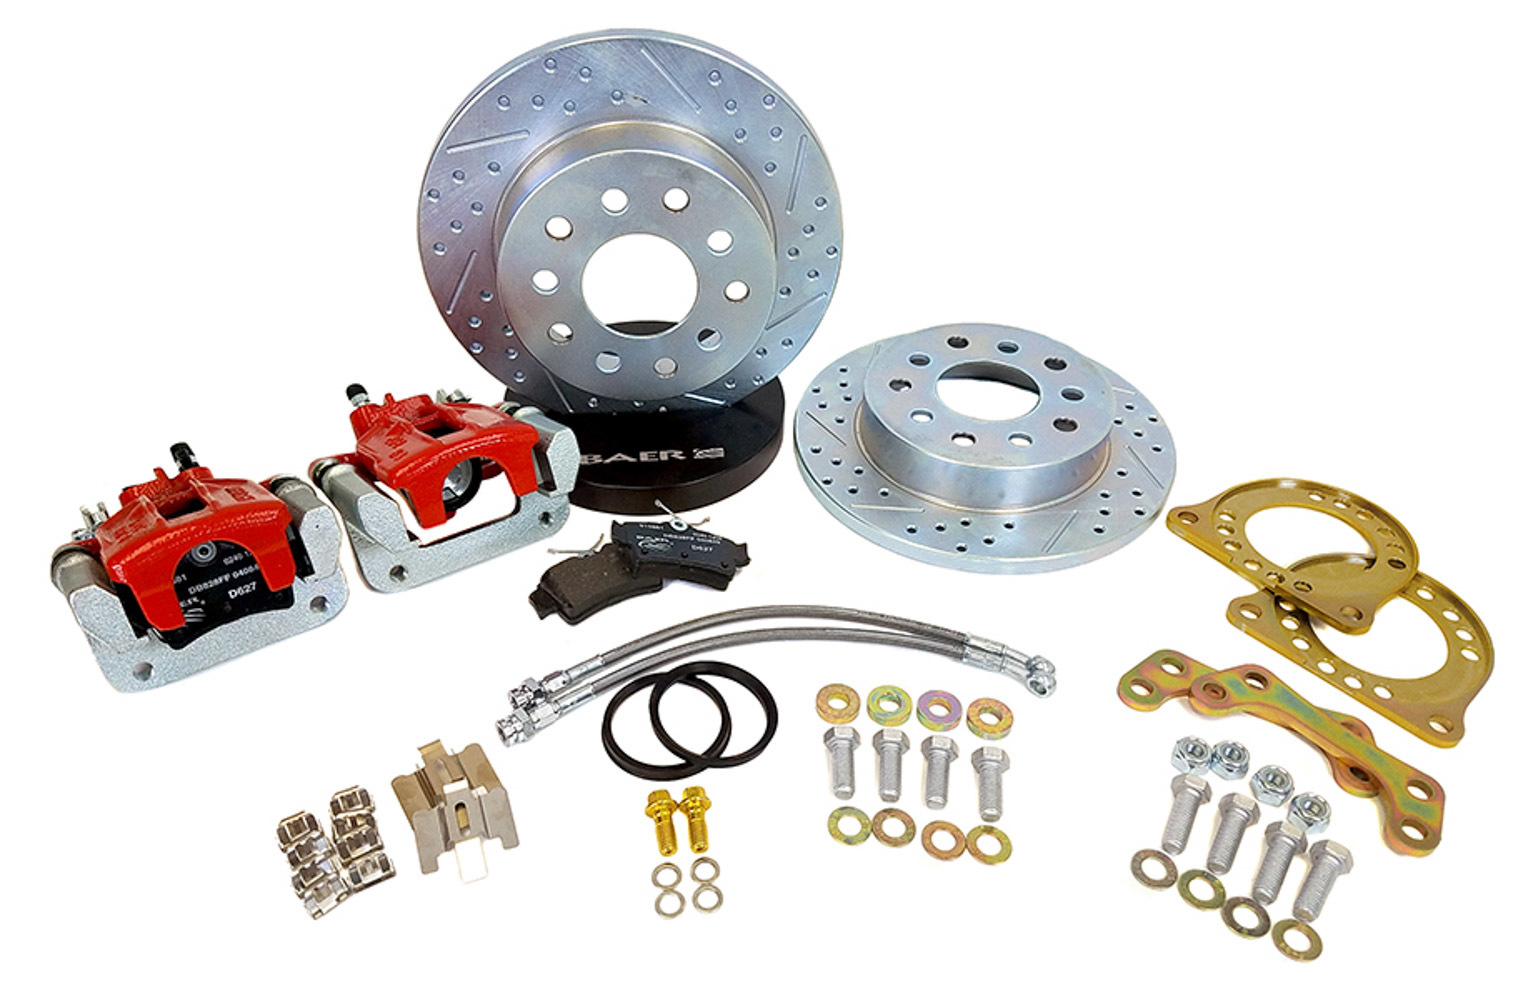 Baer Brakes 4262719R - Brake System, Classic Series, Rear, 1 Piston Caliper, 10.50 in Drilled / Slotted, 1 Piece Rotor, Aluminum, Red / Zinc Plated, 5 x 4.50 in Bolt Pattern, Big Ford, Kit